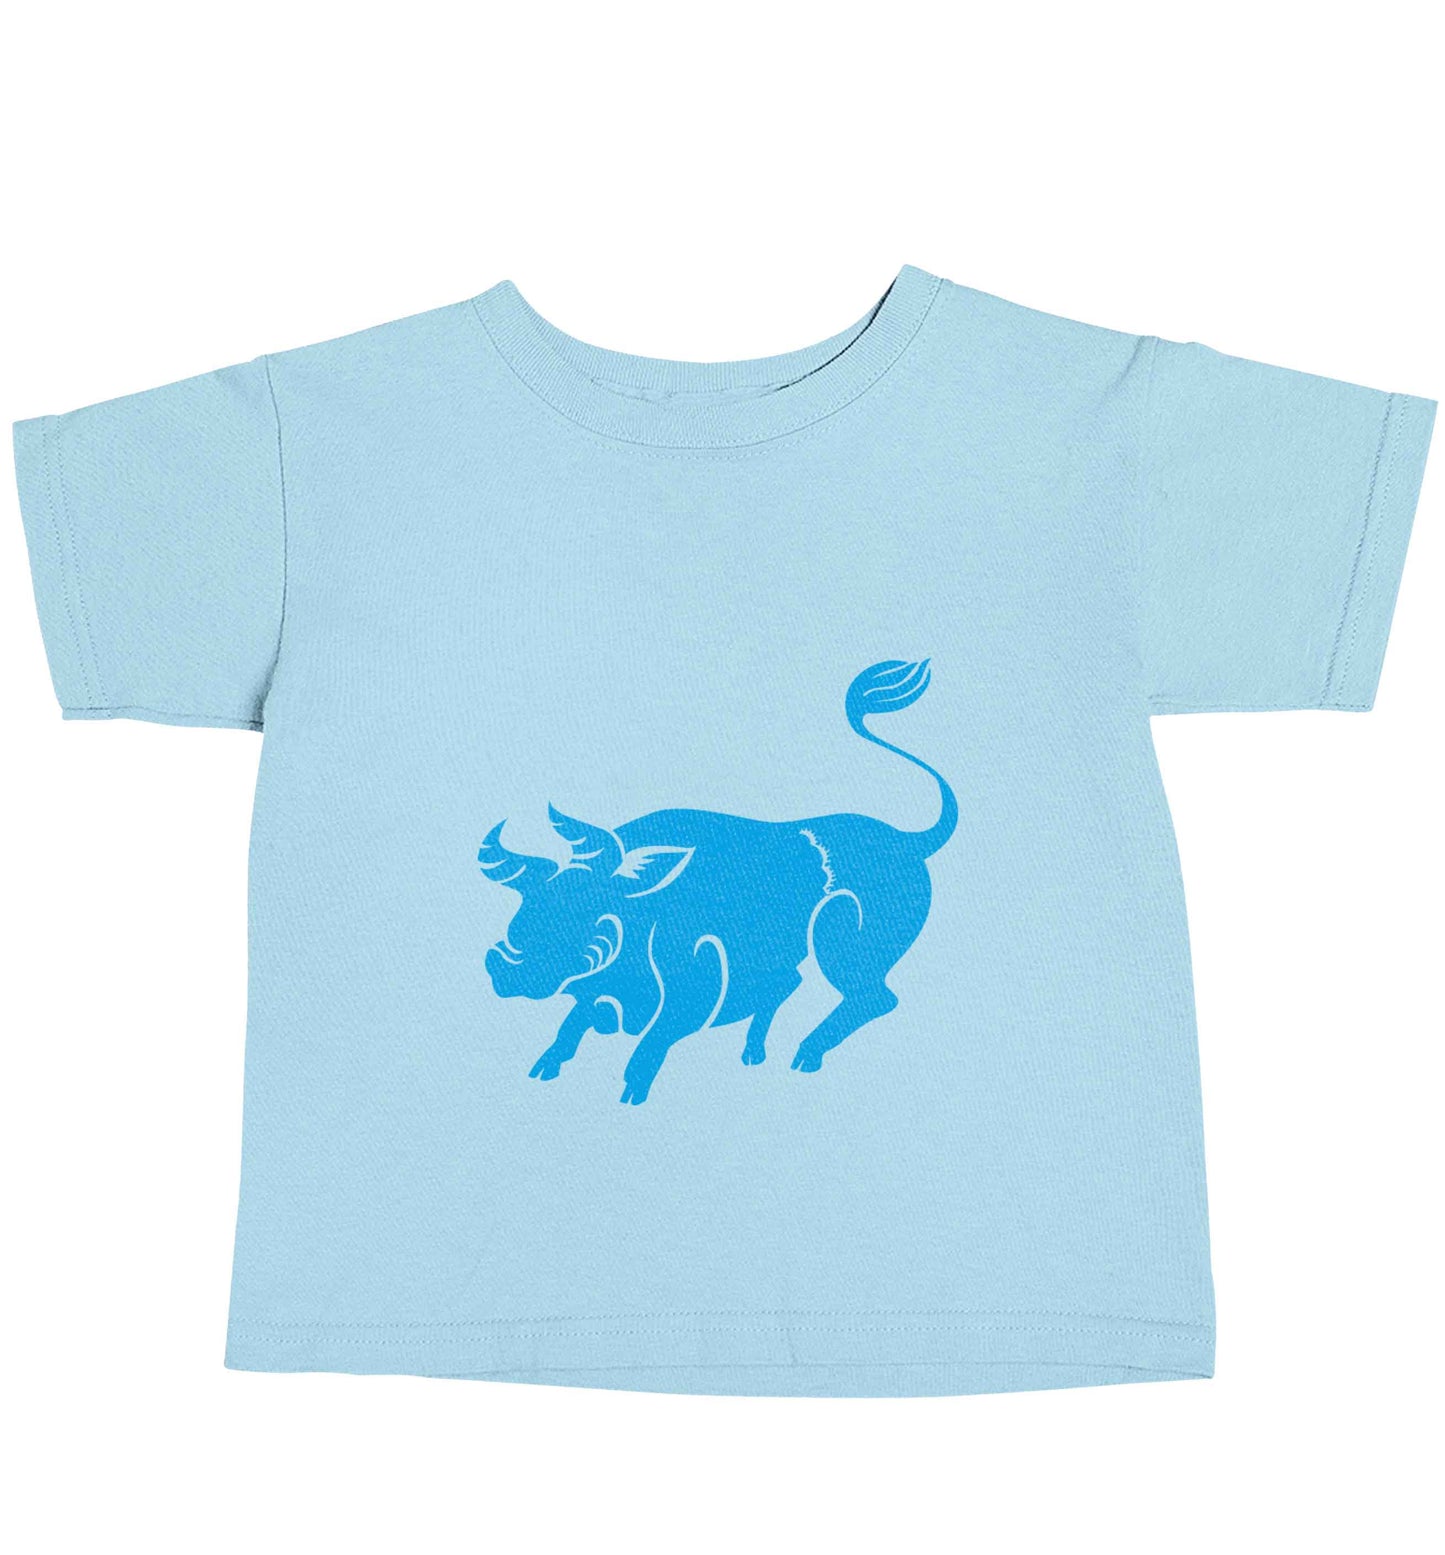 Blue ox light blue baby toddler Tshirt 2 Years